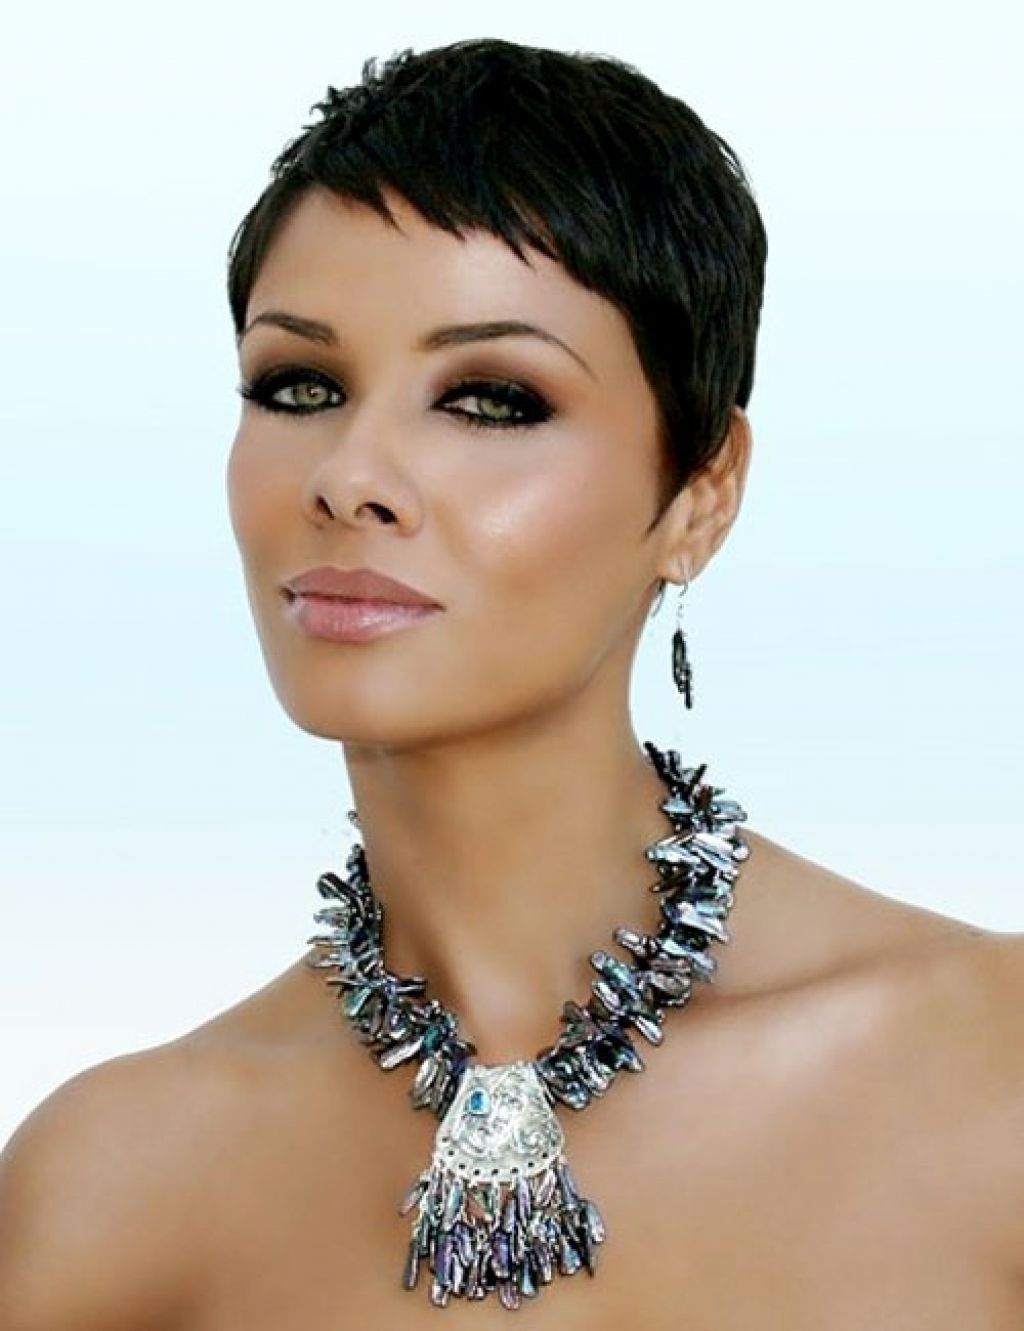 Short Pixie Cut Hairstyles Black Women Hairstyles Medium Hair For Current Short Pixie Hairstyles For Black Hair (View 11 of 15)